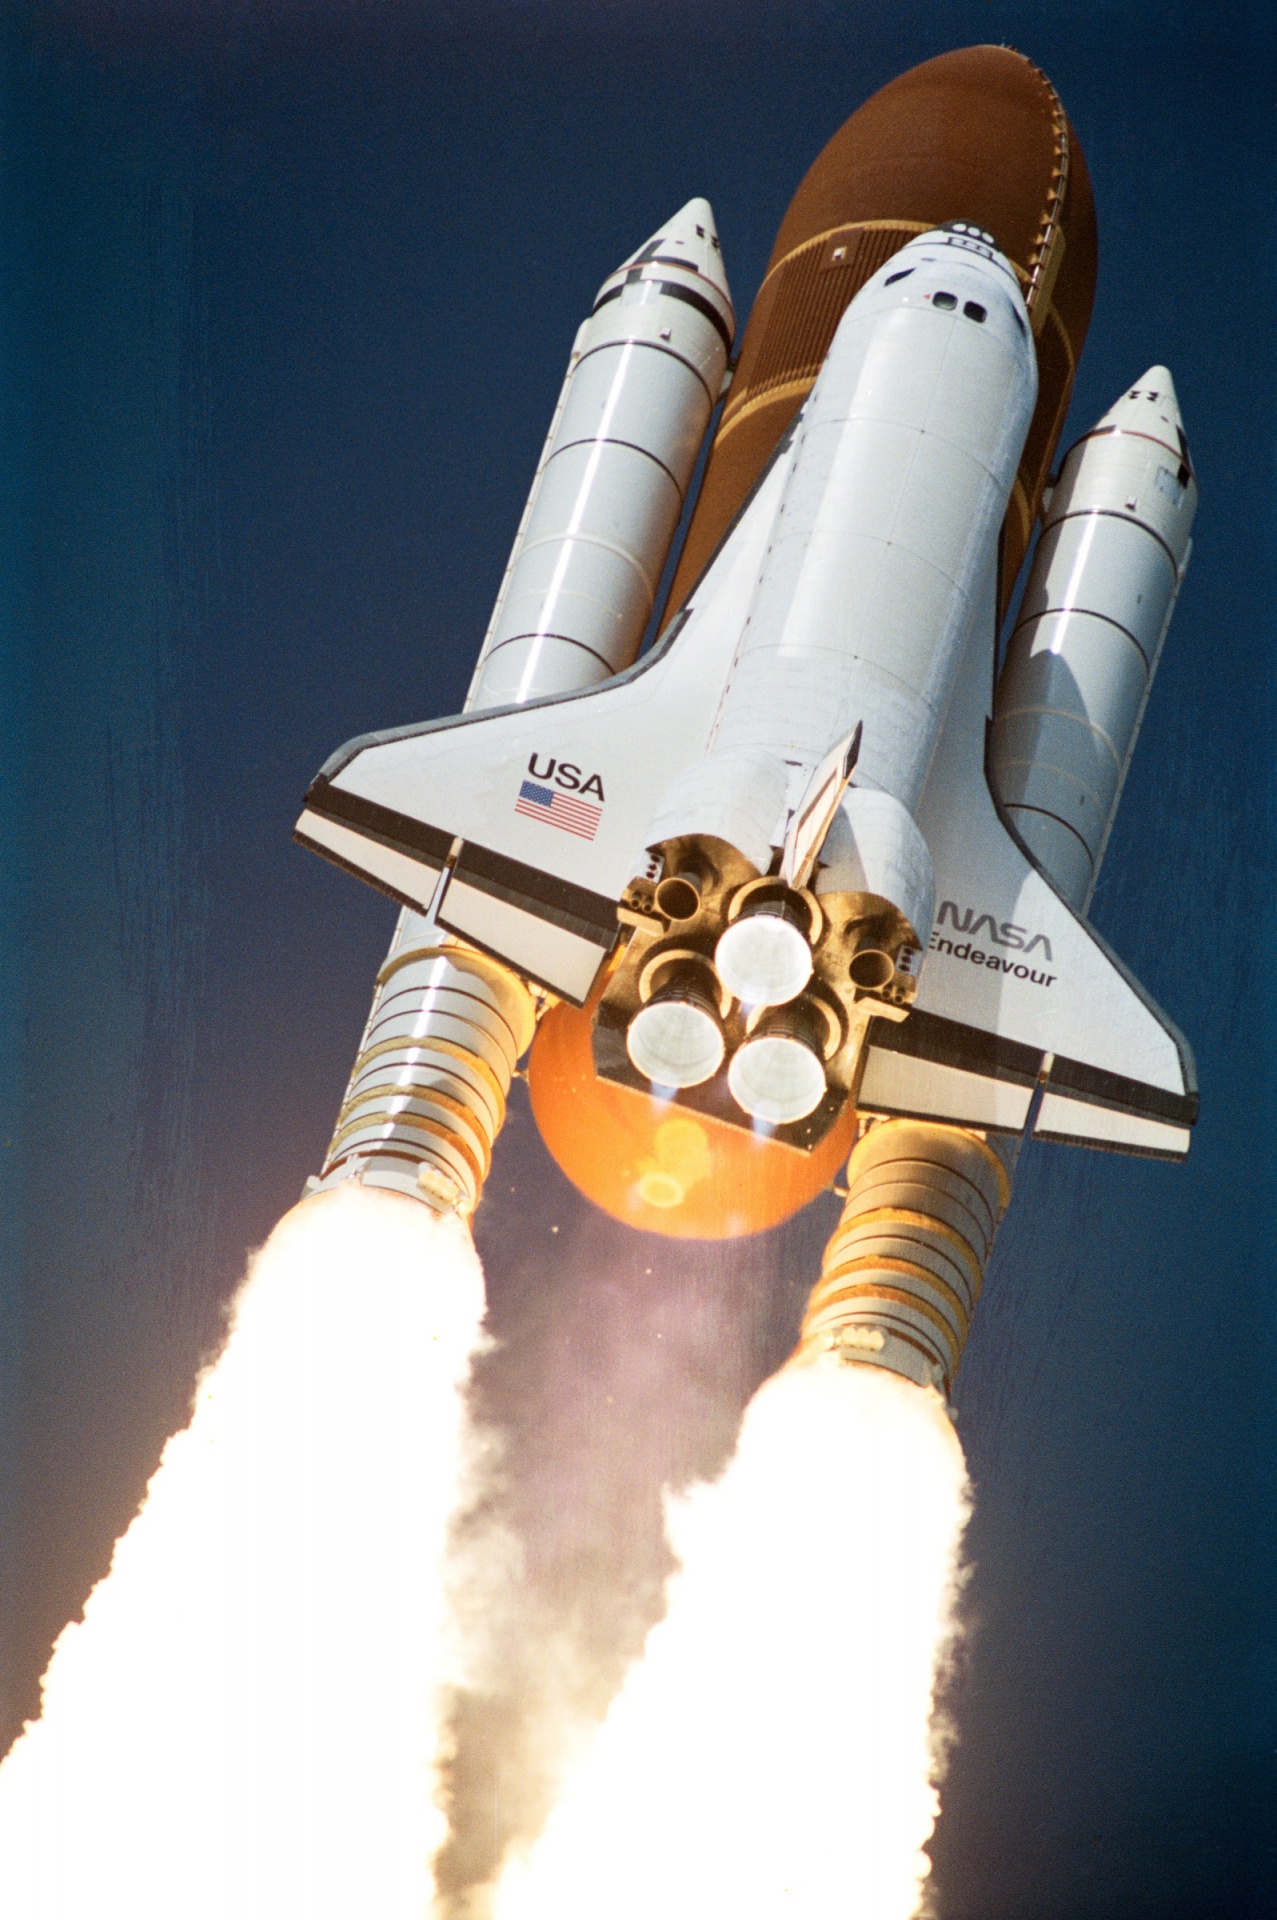 launch of space shuttle endeavour